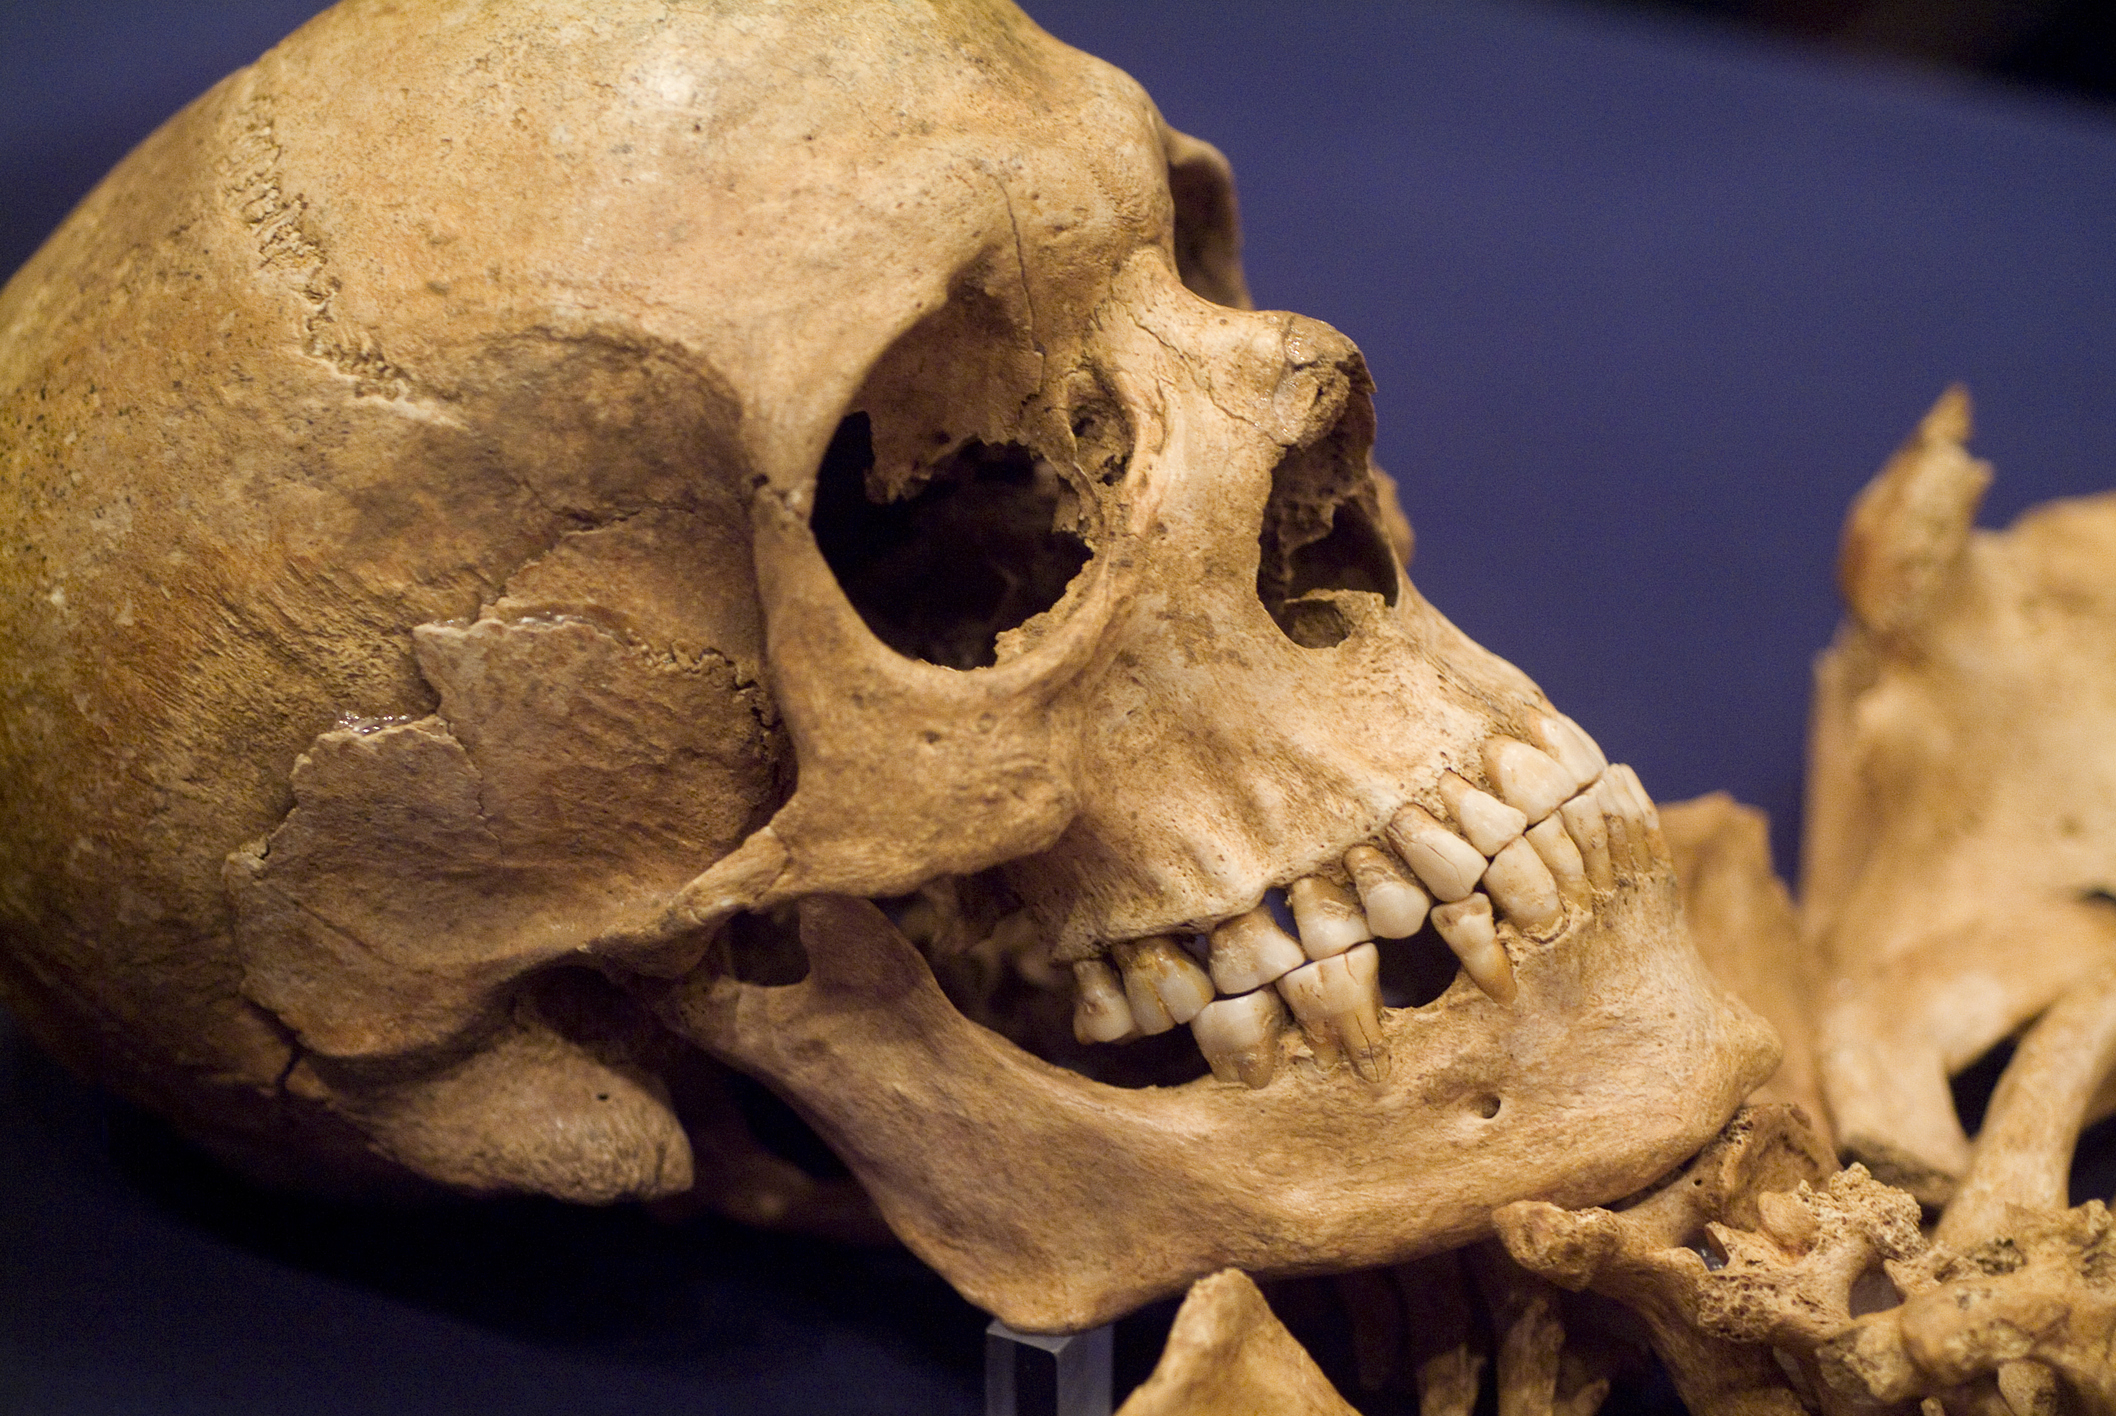 Close-up of a human skull showing teeth, possibly from an archeological find, displayed for study or exhibit